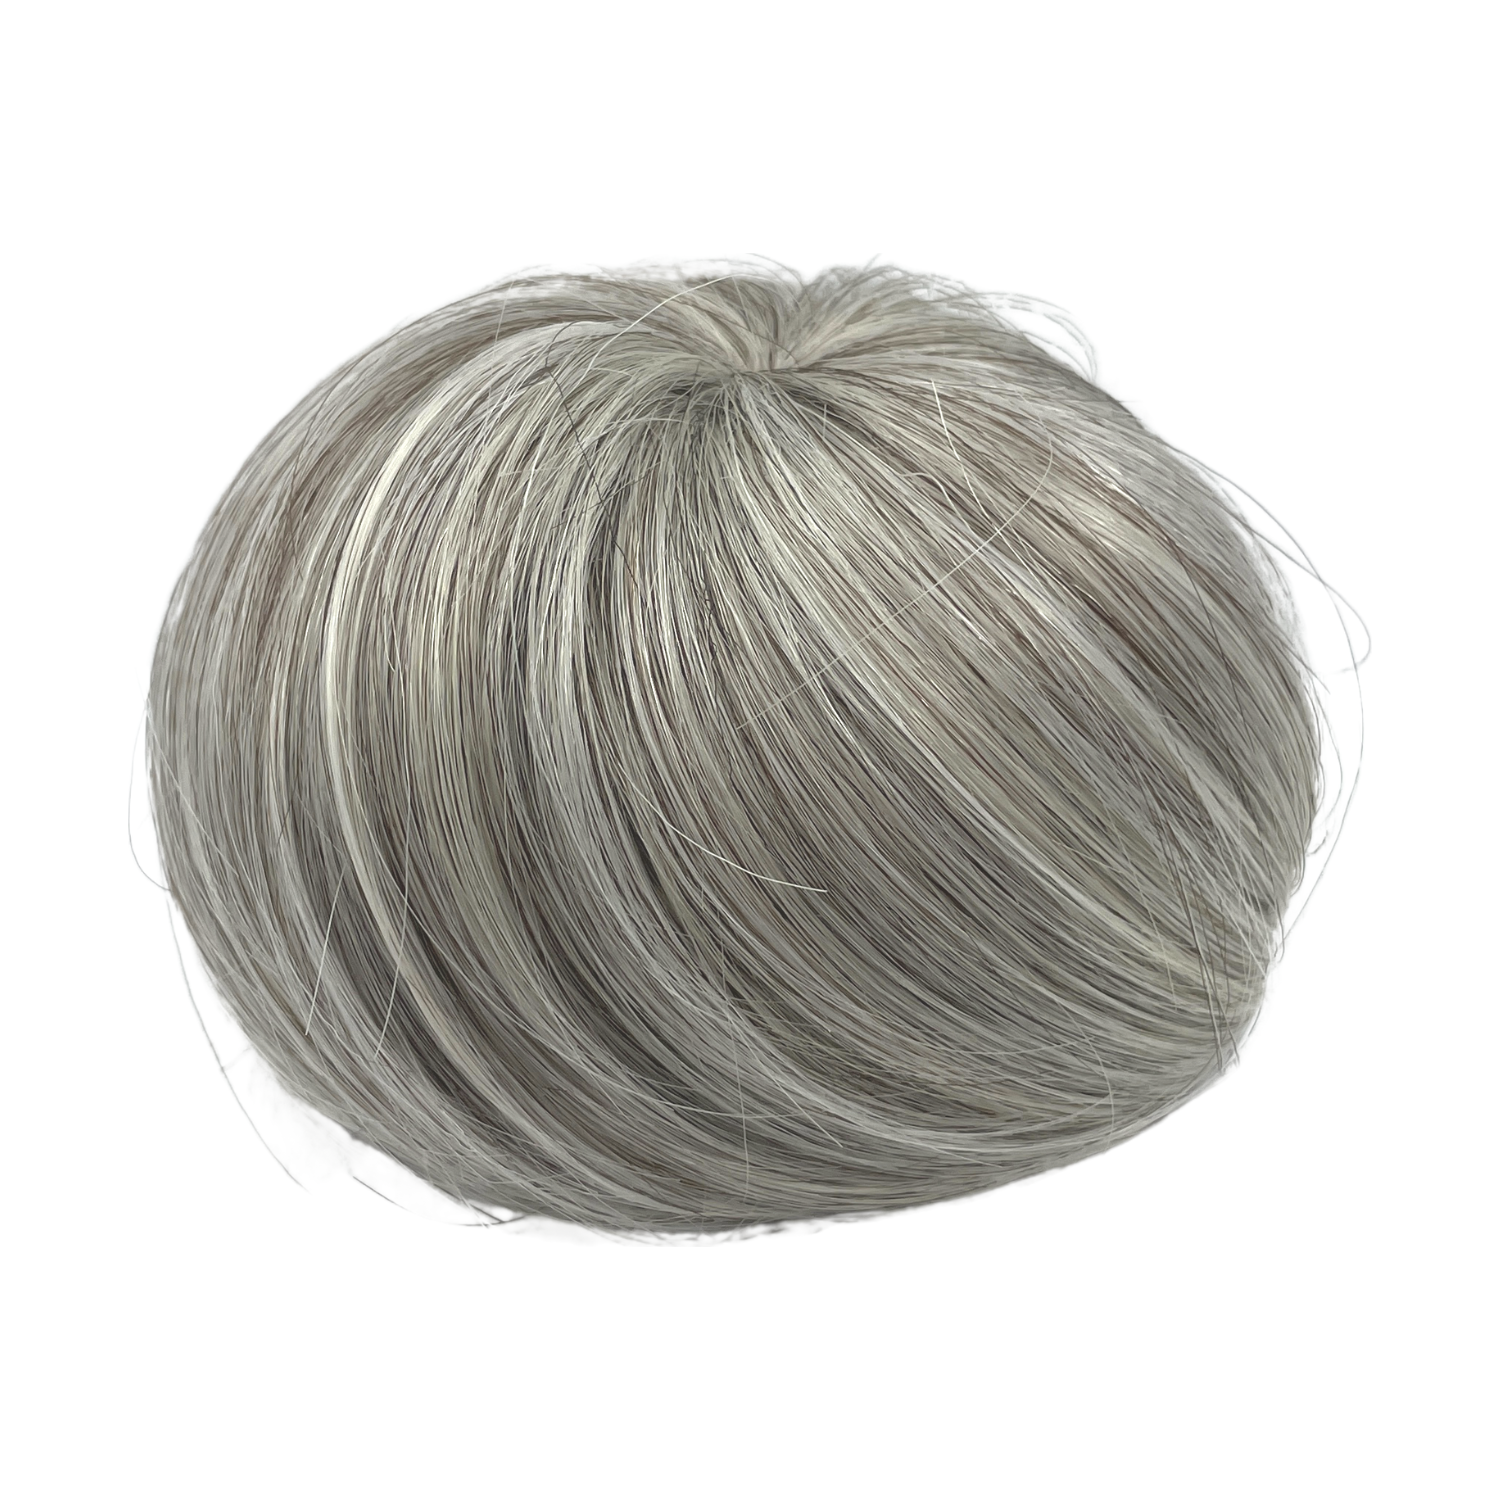 image of hair rehab london clip on bun hairpiece in shade silver grey